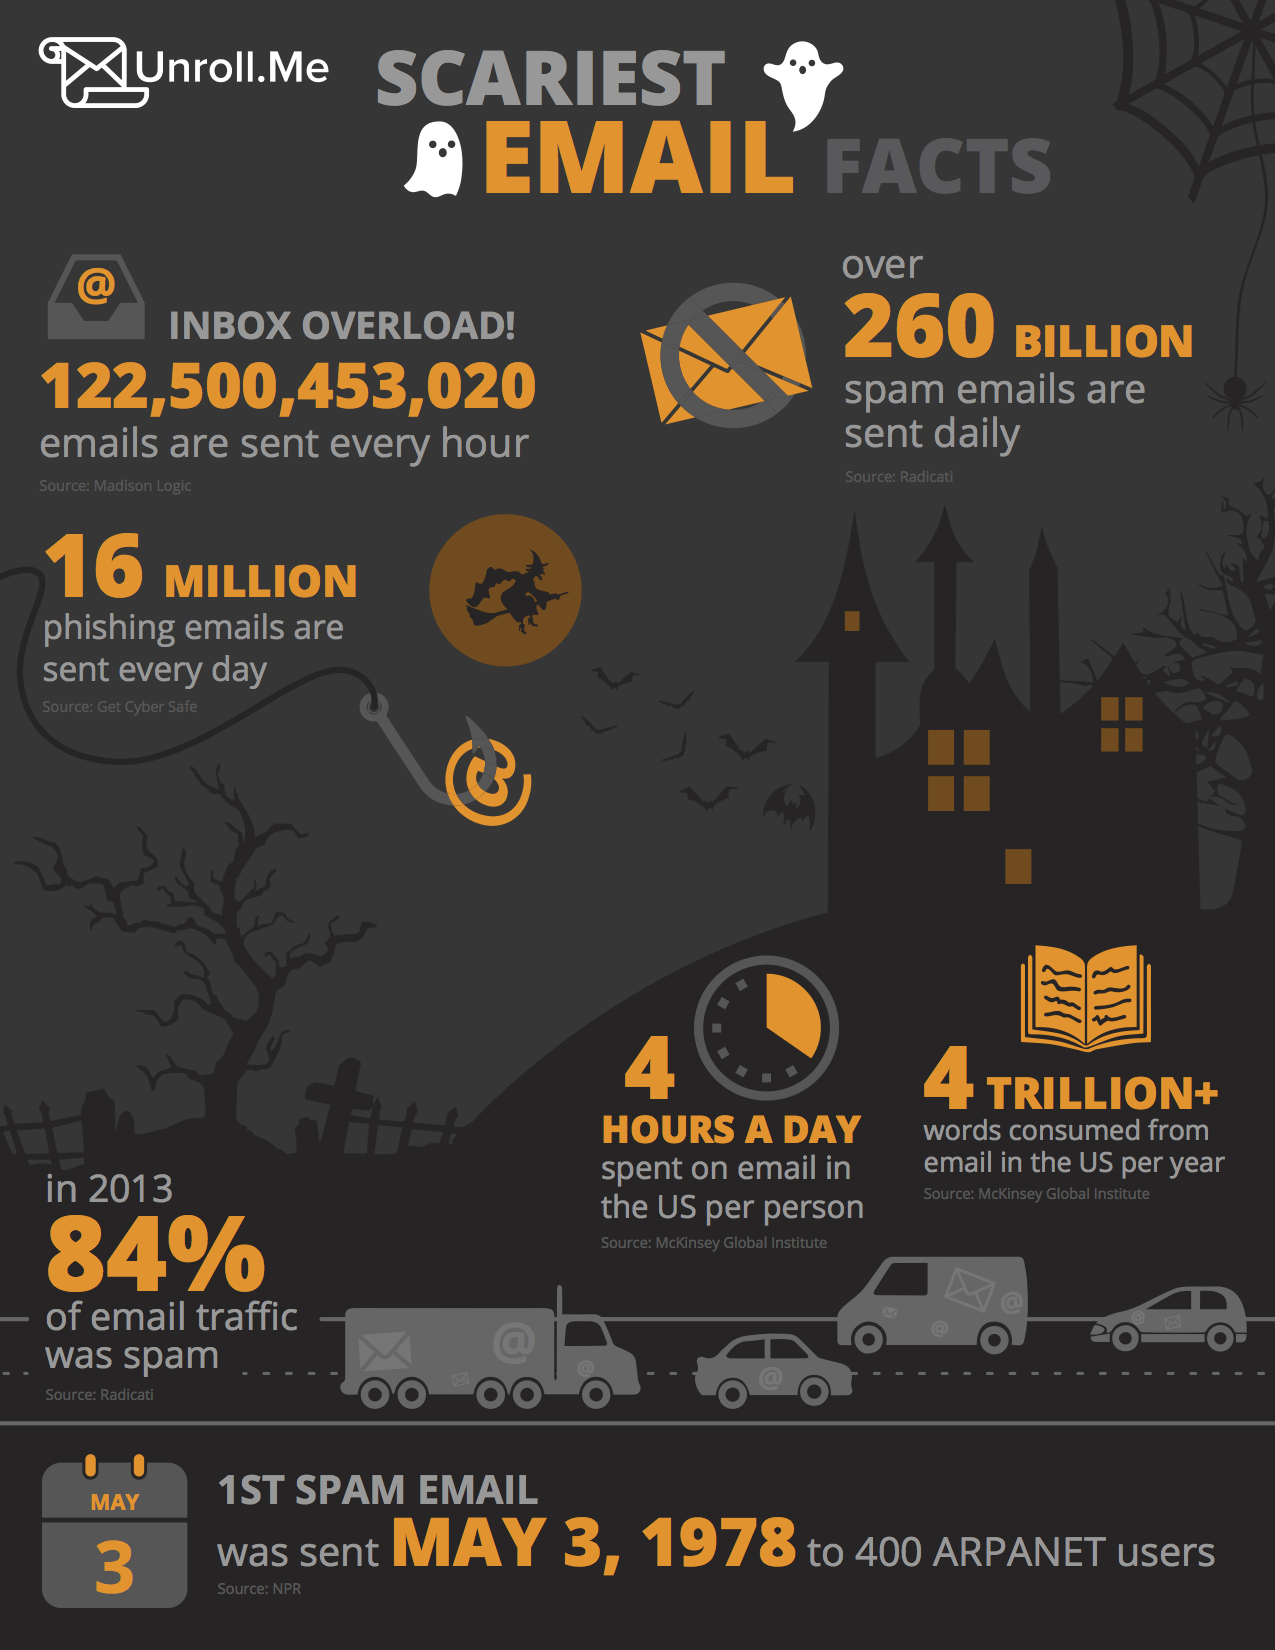 unrollme_scariestemailfacts_infographic_PRESS